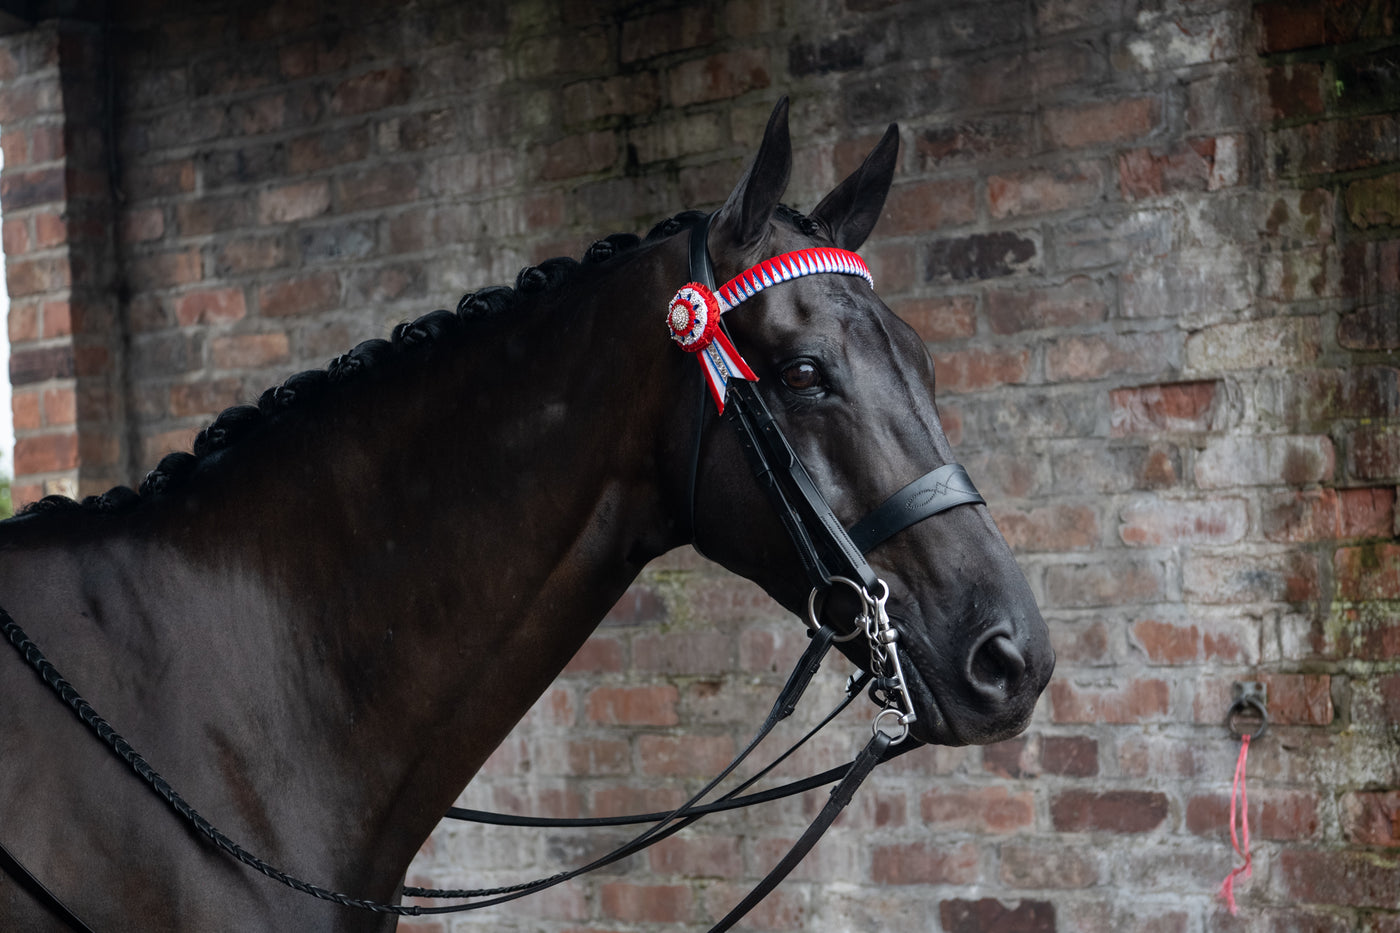 A perfectly groomed and plaited horse wearing a show bridle